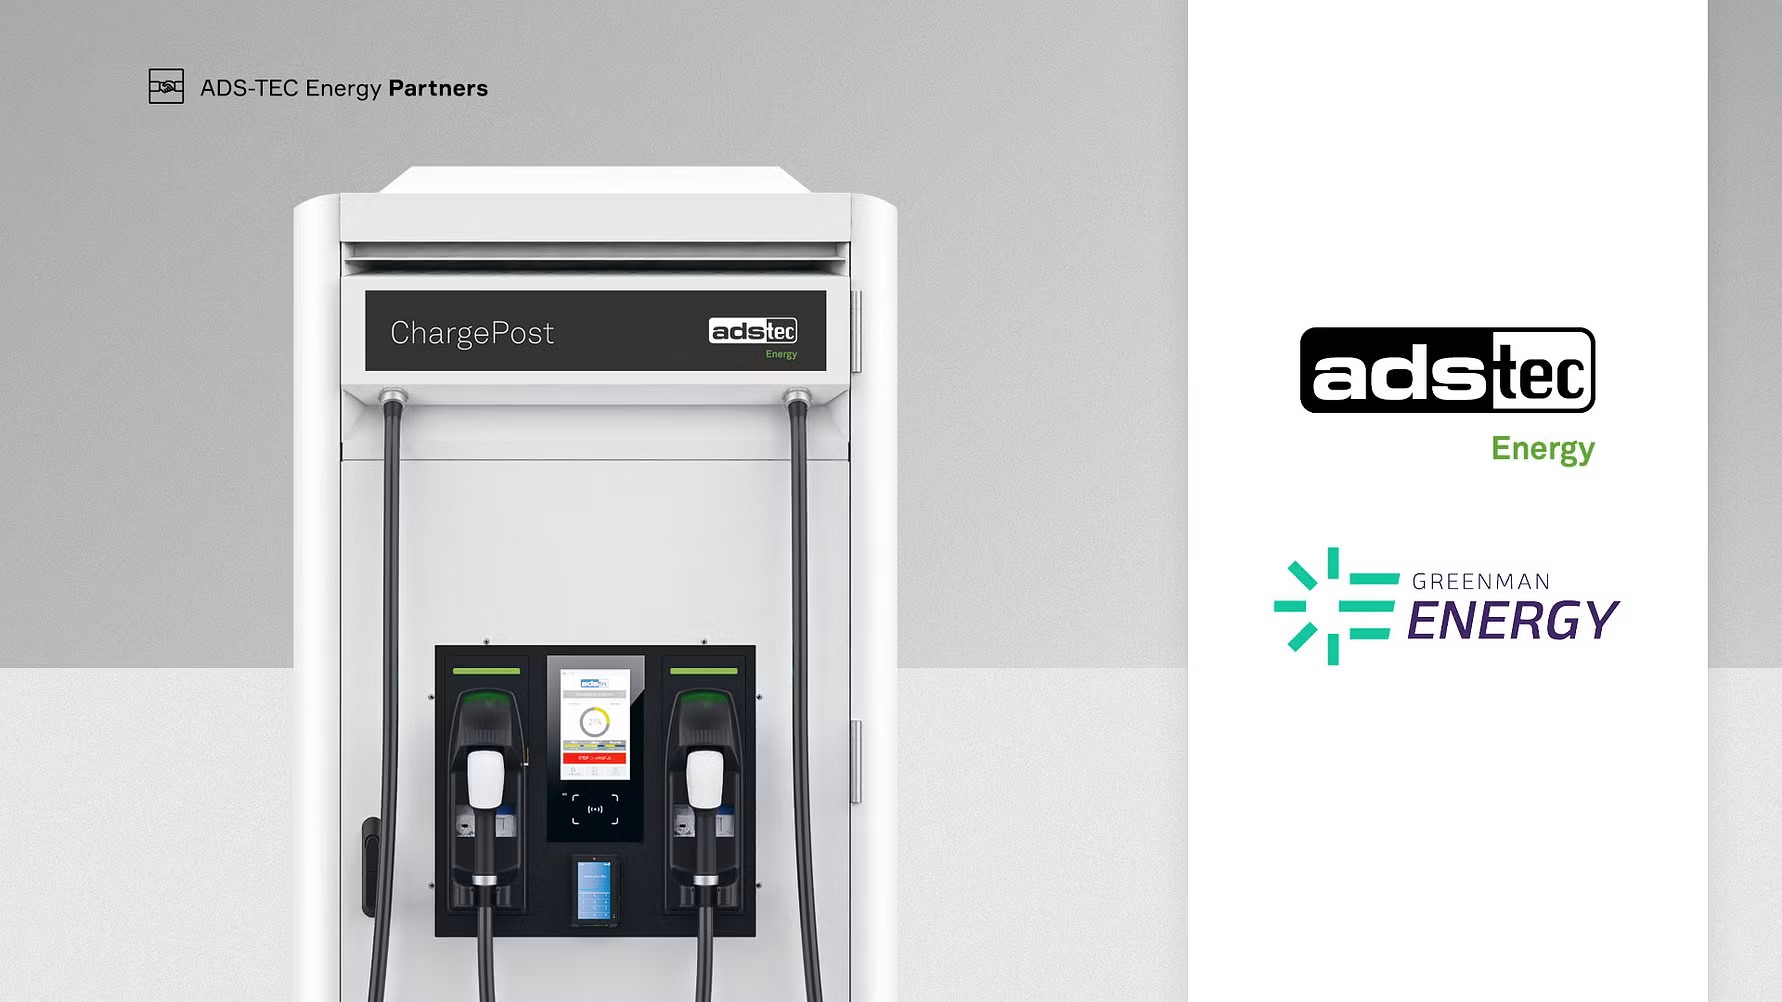 With ChargePost, Greenman Energy is bringing ultra-fast charging to supermarket parking lots. Image: Ads-Tec Energy